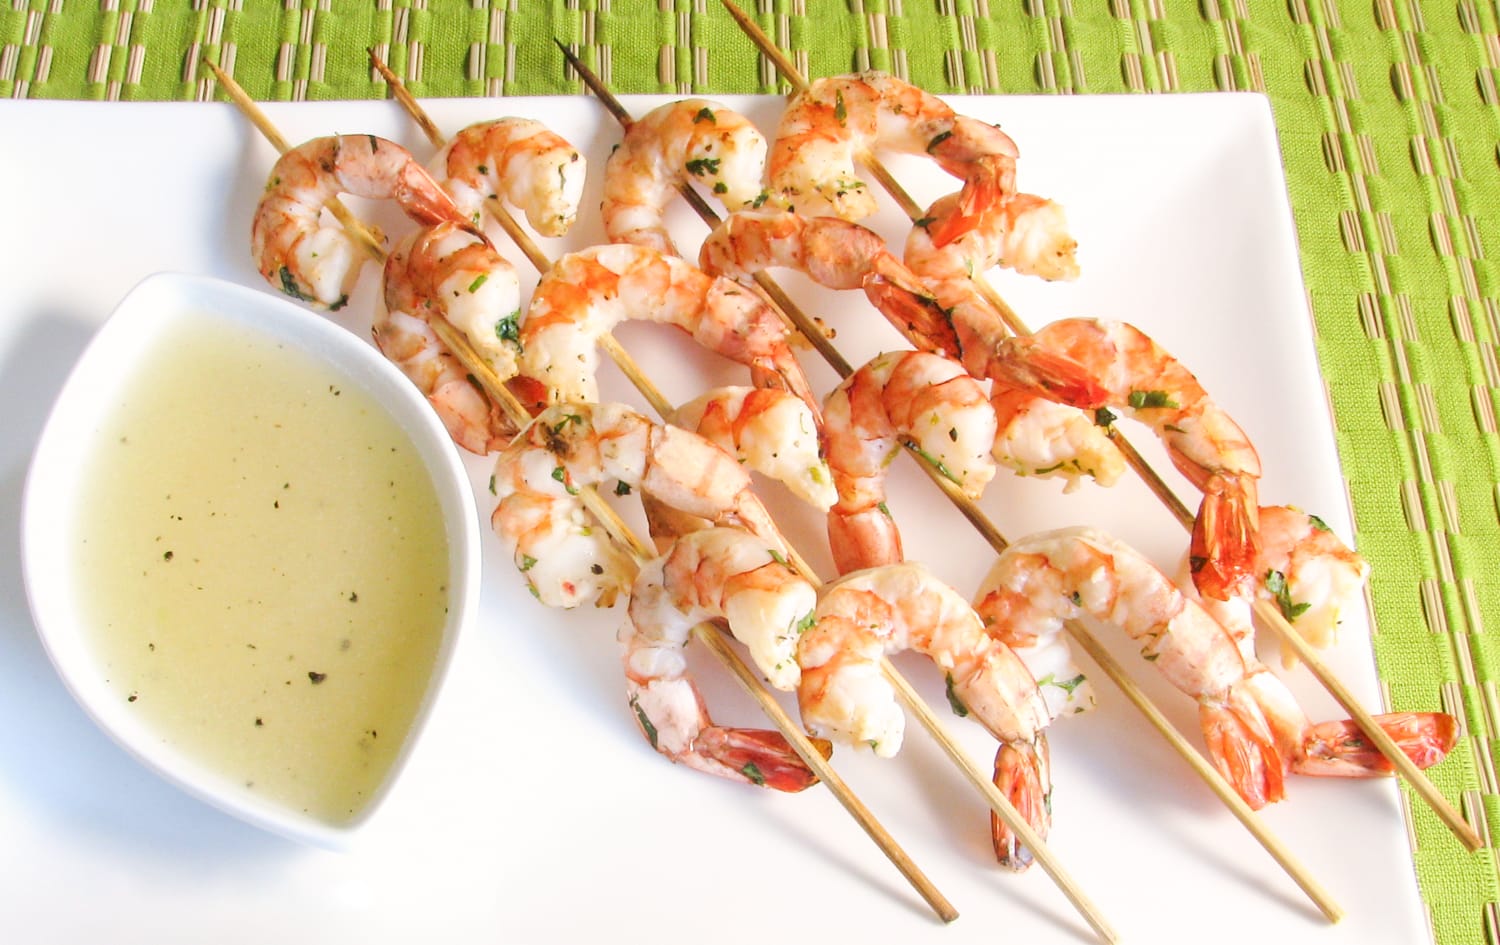 Cilantro Lime Shrimp with a Honey Lime Dipping Sauce